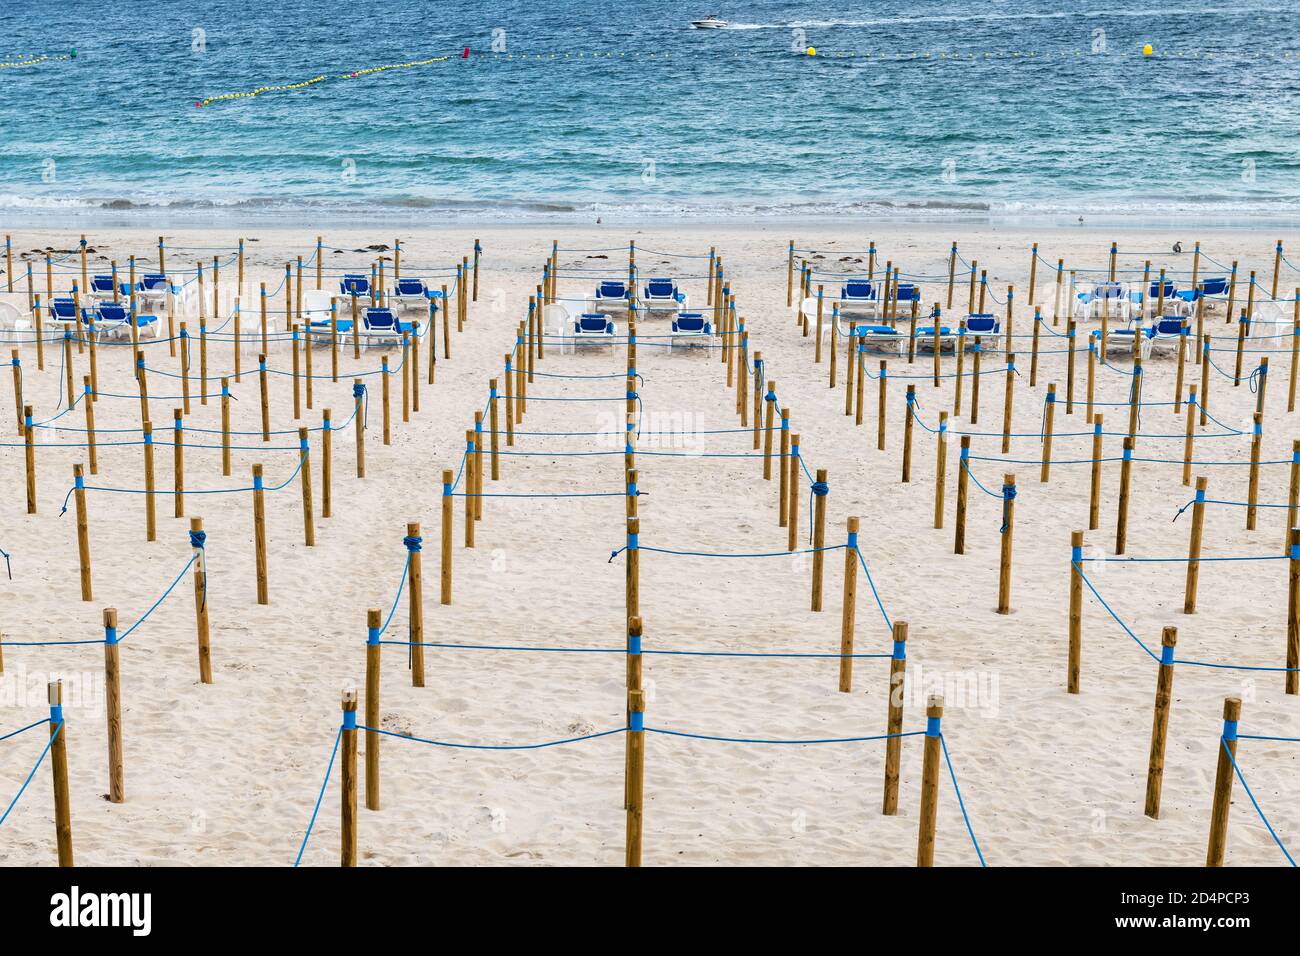 SANXENXO, SPAIN - AUGUST 18, 2020: Empty Silgar beach in Sanxenxo during the outbreak of the Covid 19 virus, with the protection measures in place to Stock Photo